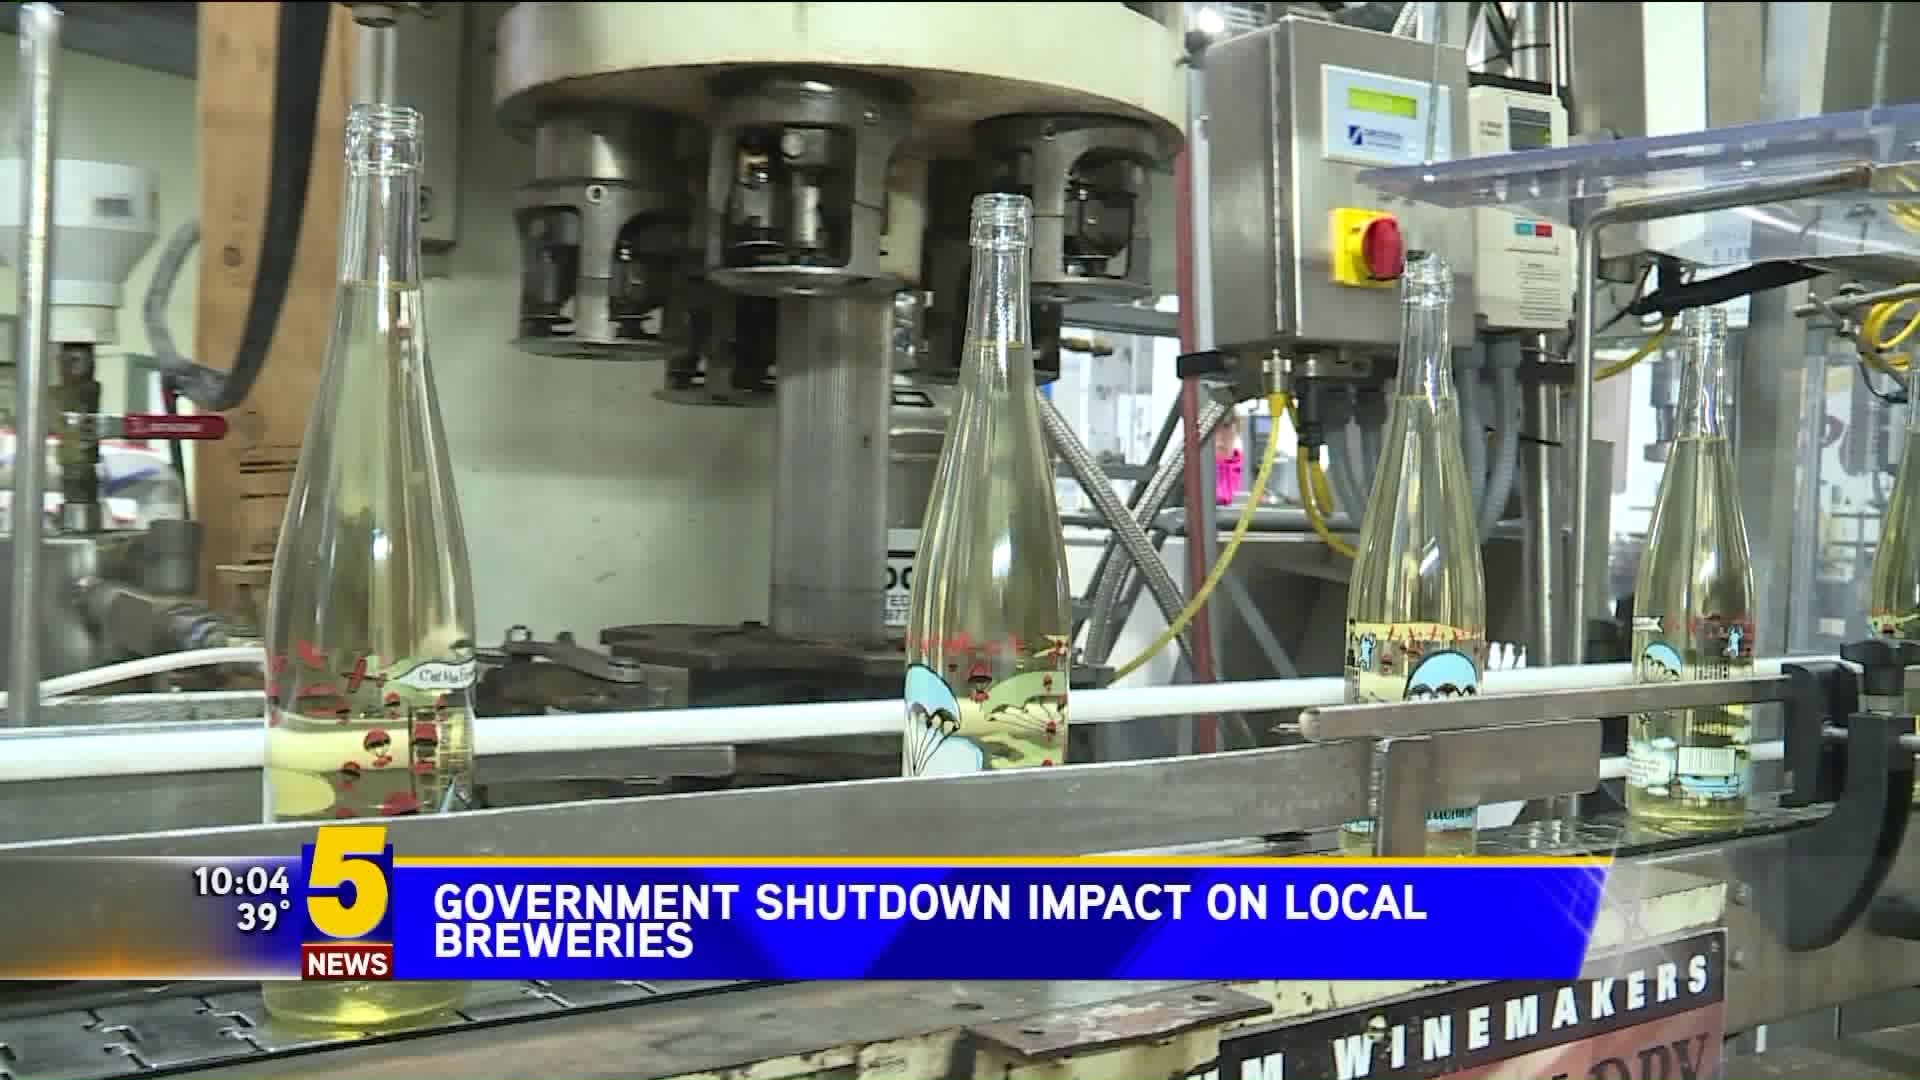 Government shutdown impact on local breweries